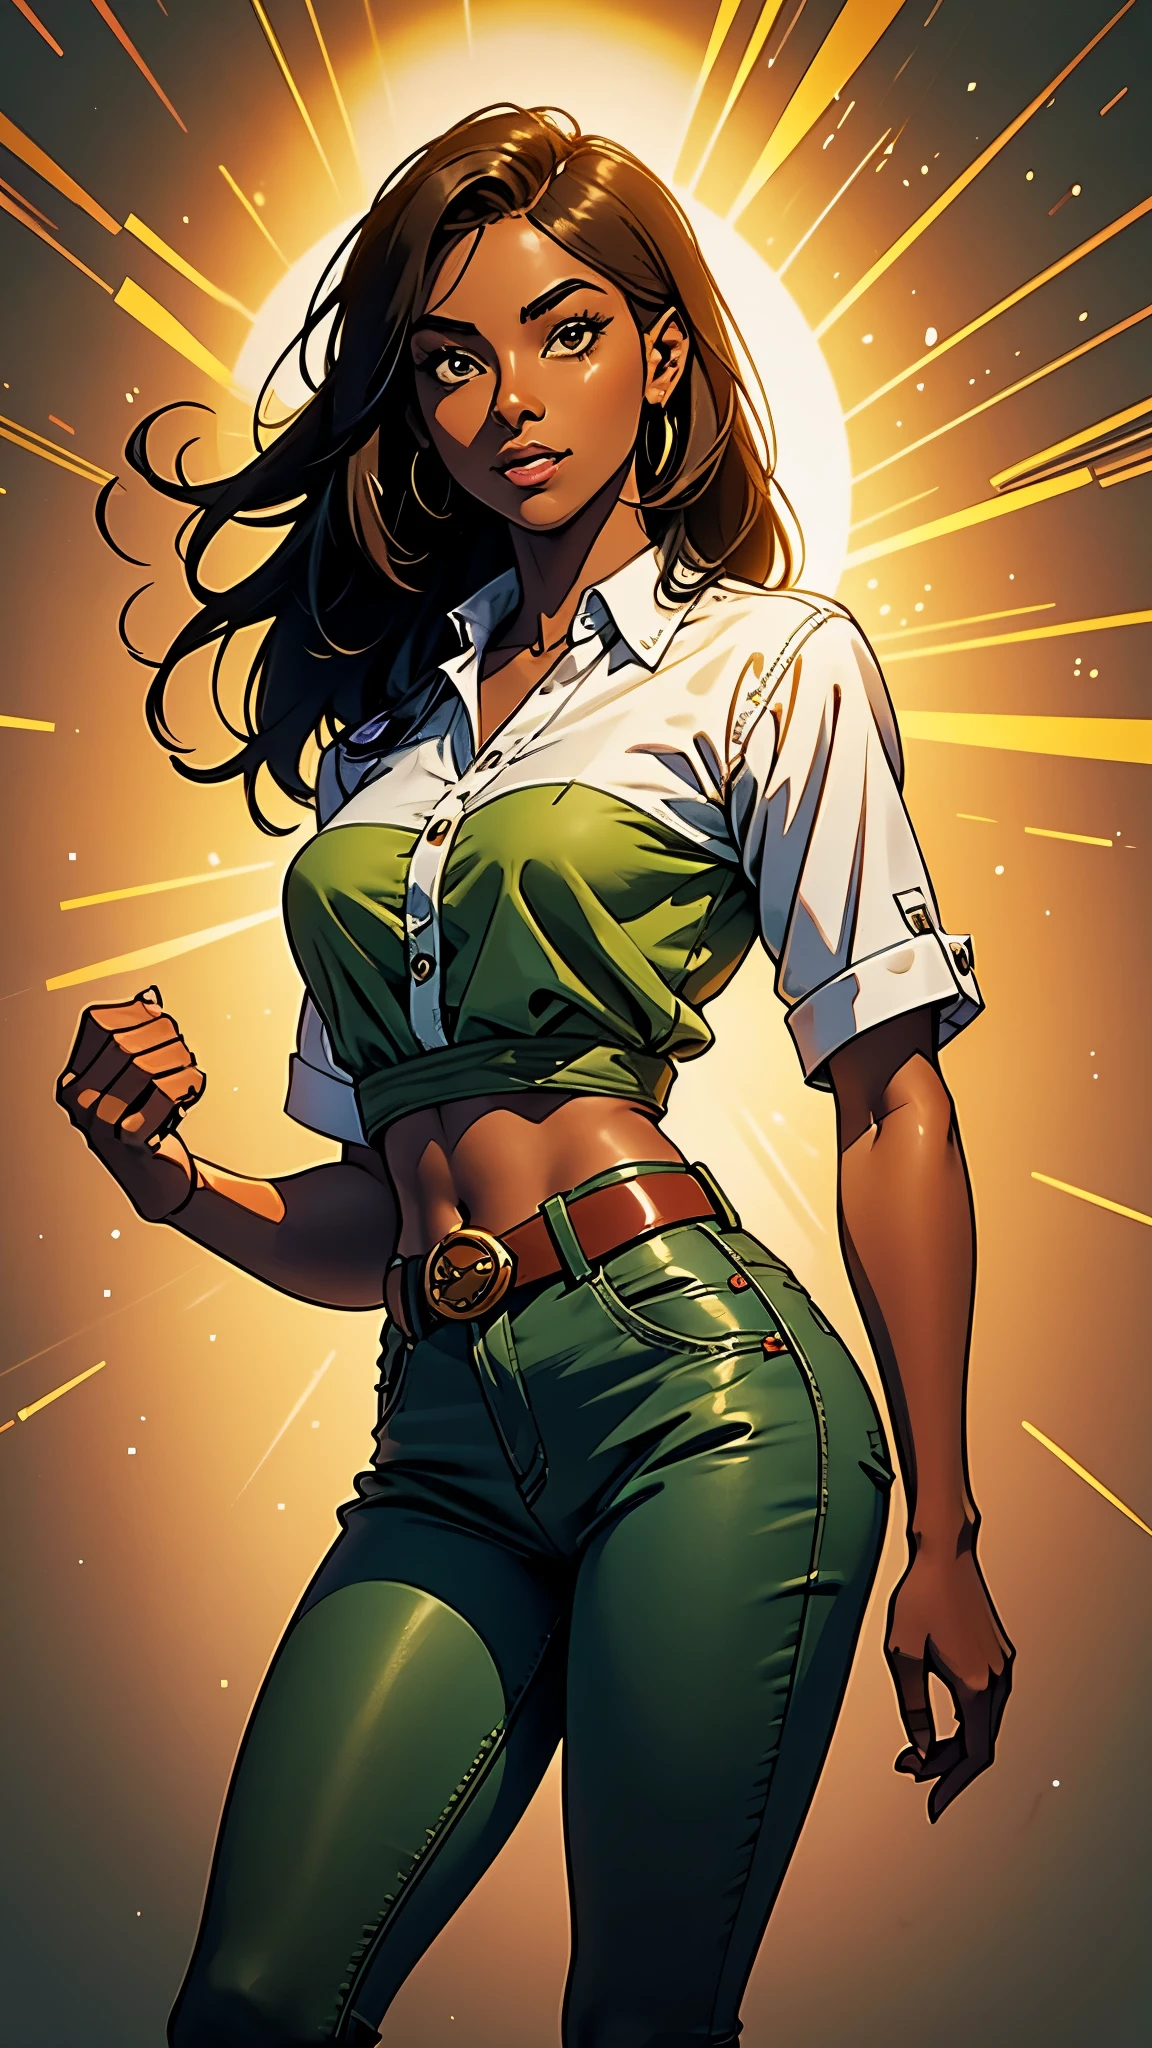 Leilani, she is short, with dark skin and straight hair, approximately 21 years old and with a cheerful personality, she was wearing a green and denim blouse and in the middle a brown belt that showed off her thin waist, comic style